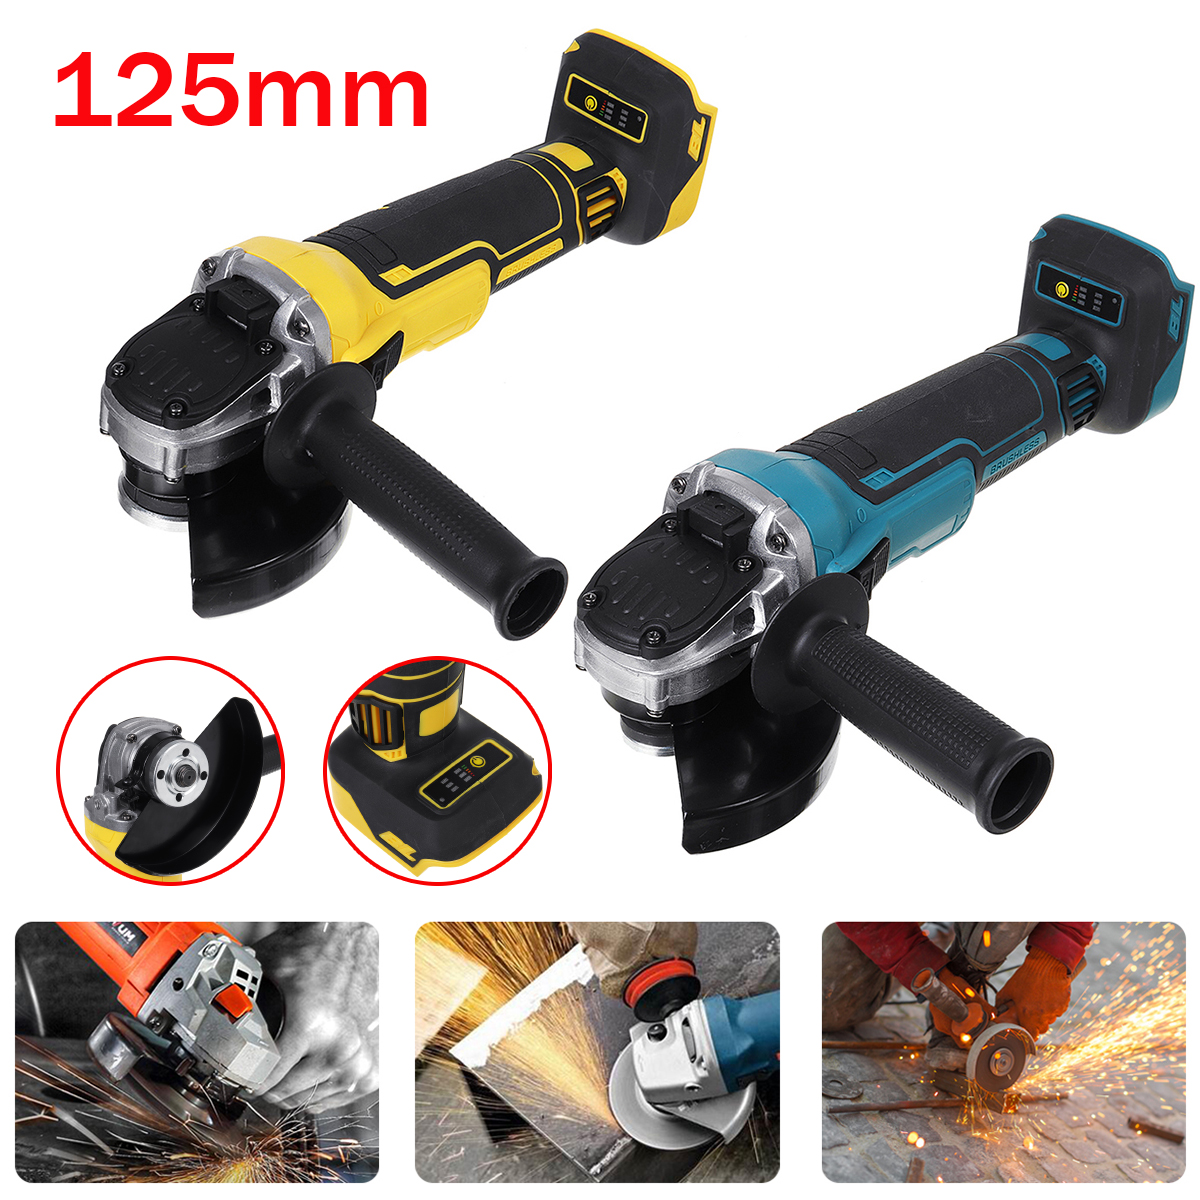 Drillpro-Electric-Brushless-Cordless-Angle-Grinder-M10-125mm-Cut-for-Makiita-18V-Battery-1791879-3